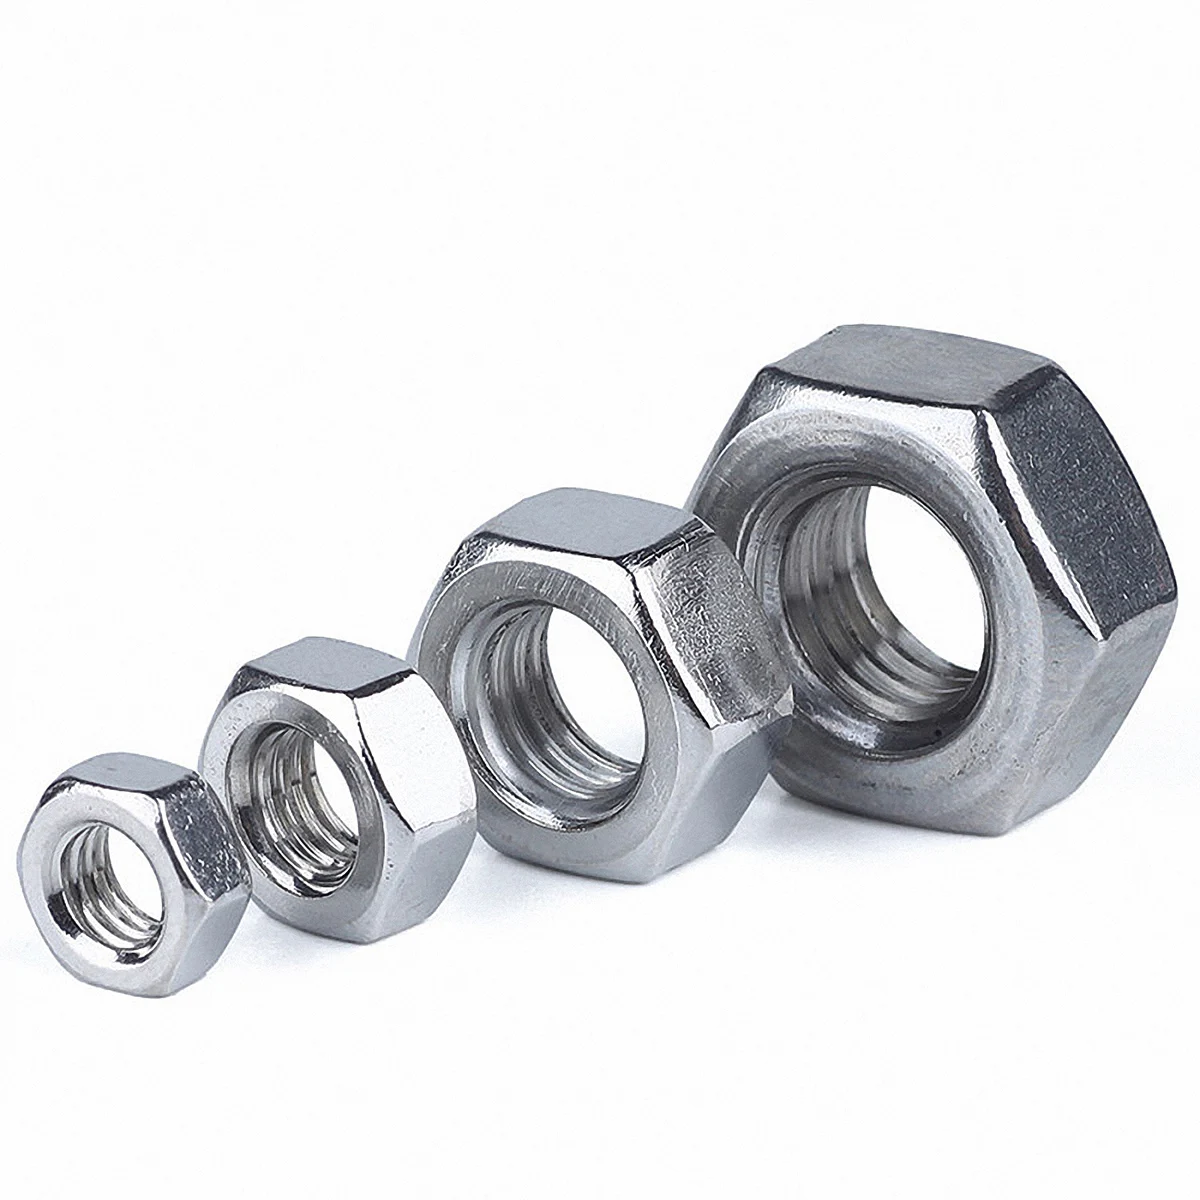 

DIN934 A4 316 Stainless Steel Hex Nut Hexagonal Nuts M2 M2.5 M2.6 M3 M4 M5 M6 M8 M10 M12 M14 M16 M18 M20 M22 M24